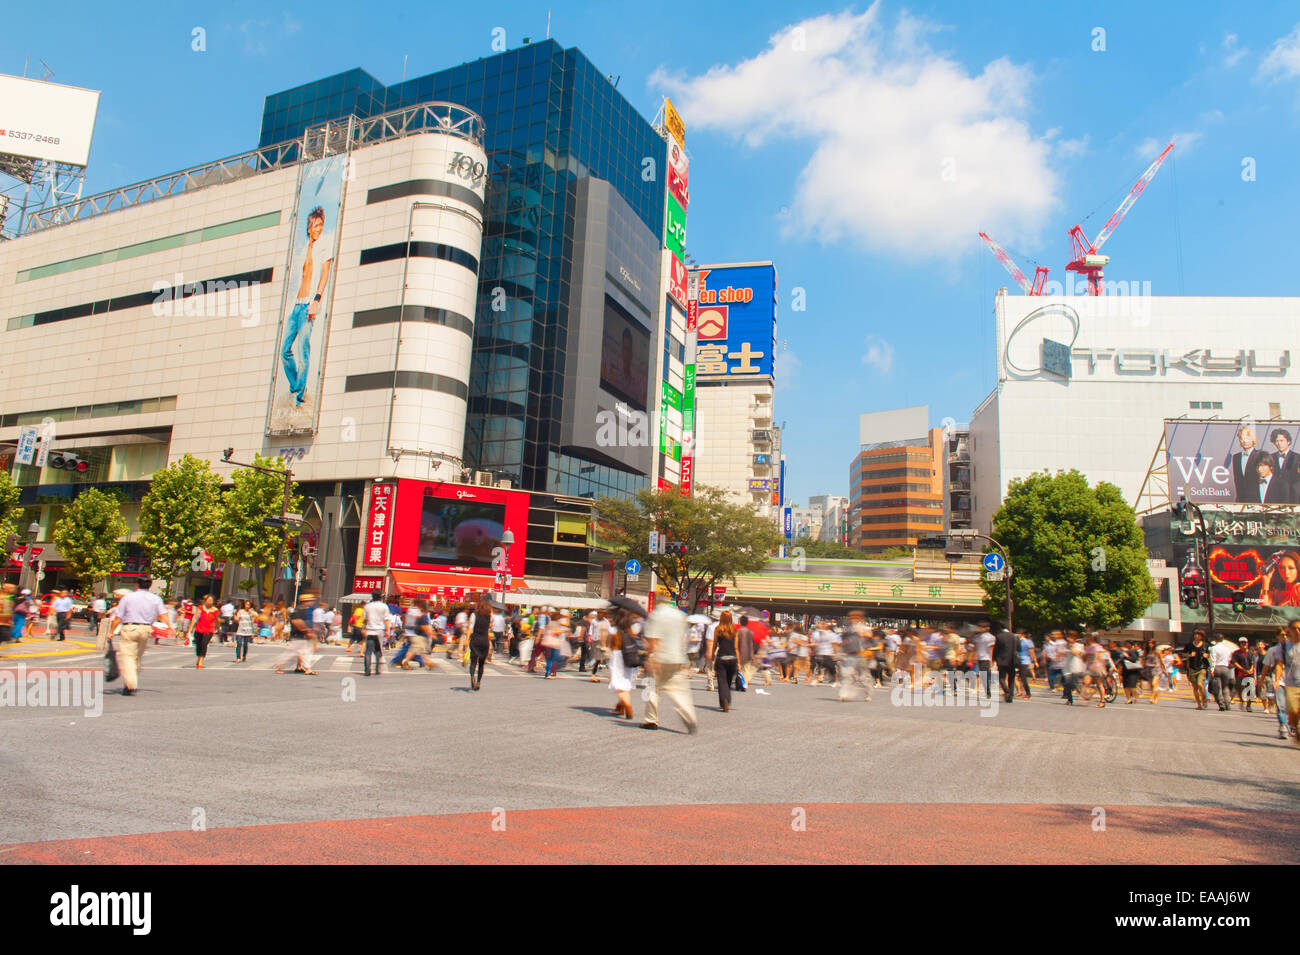 View of Shibuya Crossing, one of the busiest crosswalks in the world. Tokyo, Japan Stock Photo